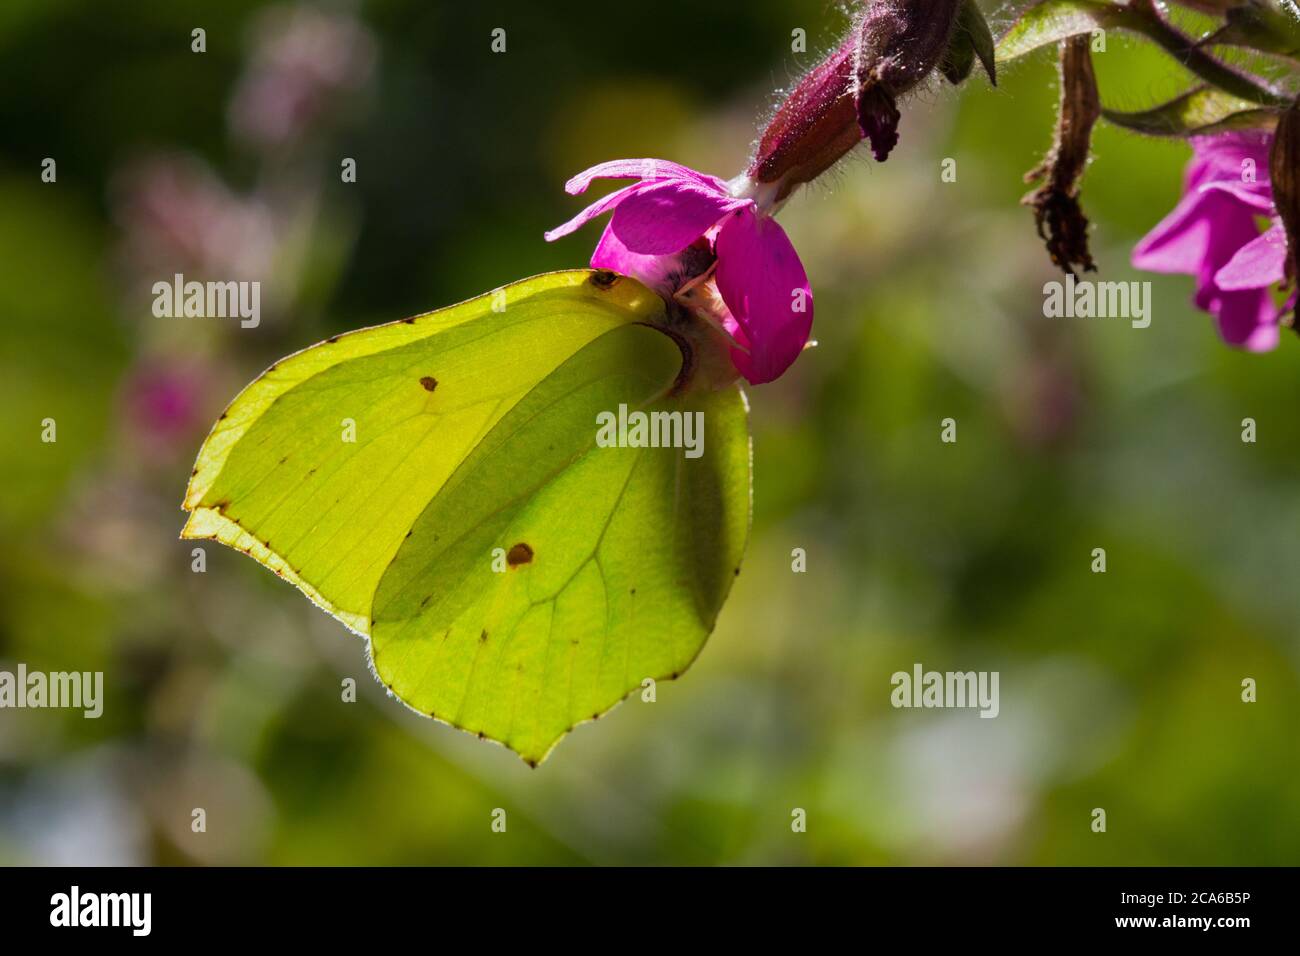 Common brimstone butterfly on the pink flower of Red campion Stock Photo